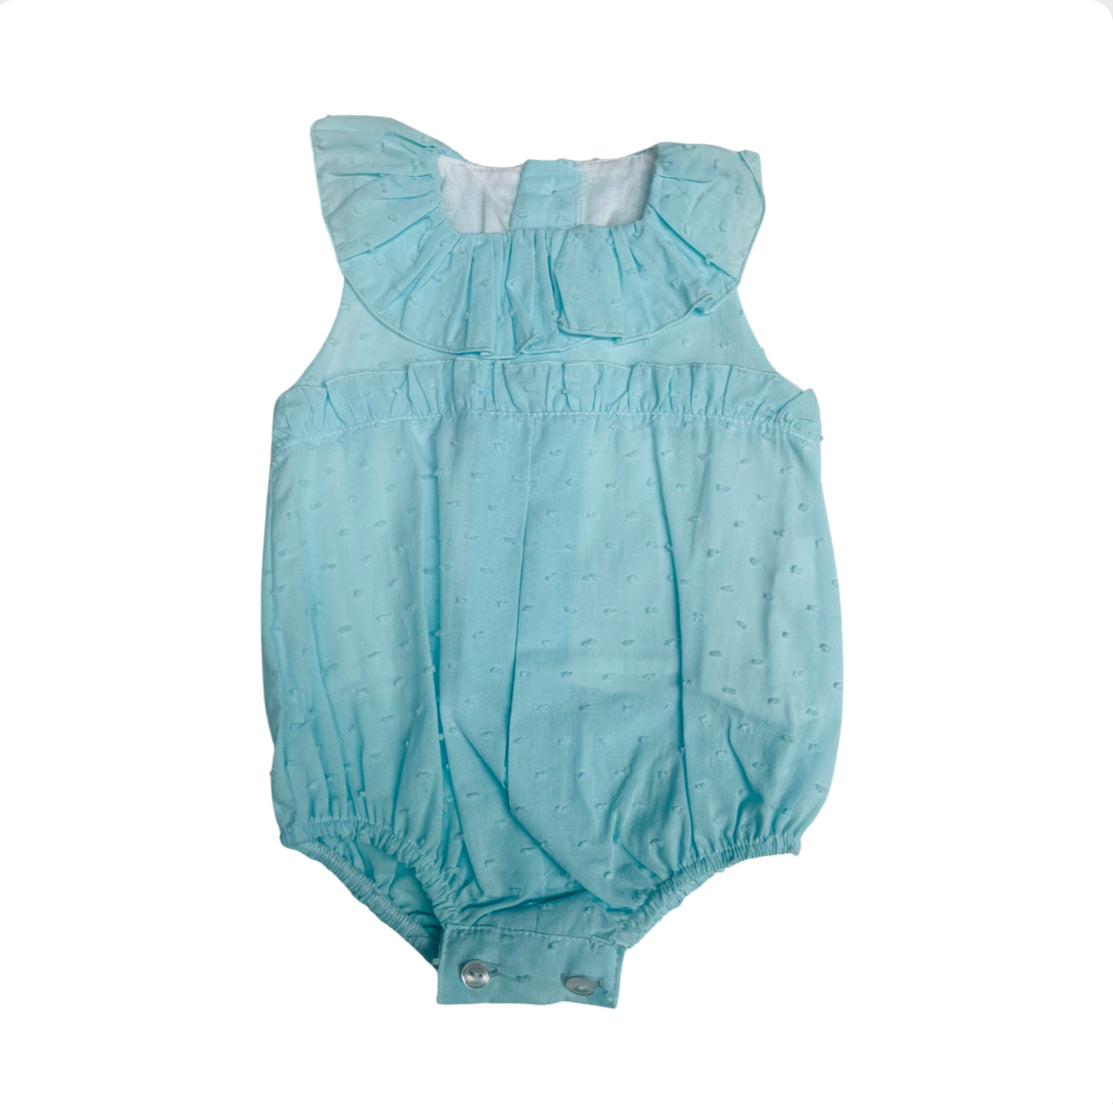 Lor Miral Baby Girl Turquoise Romper